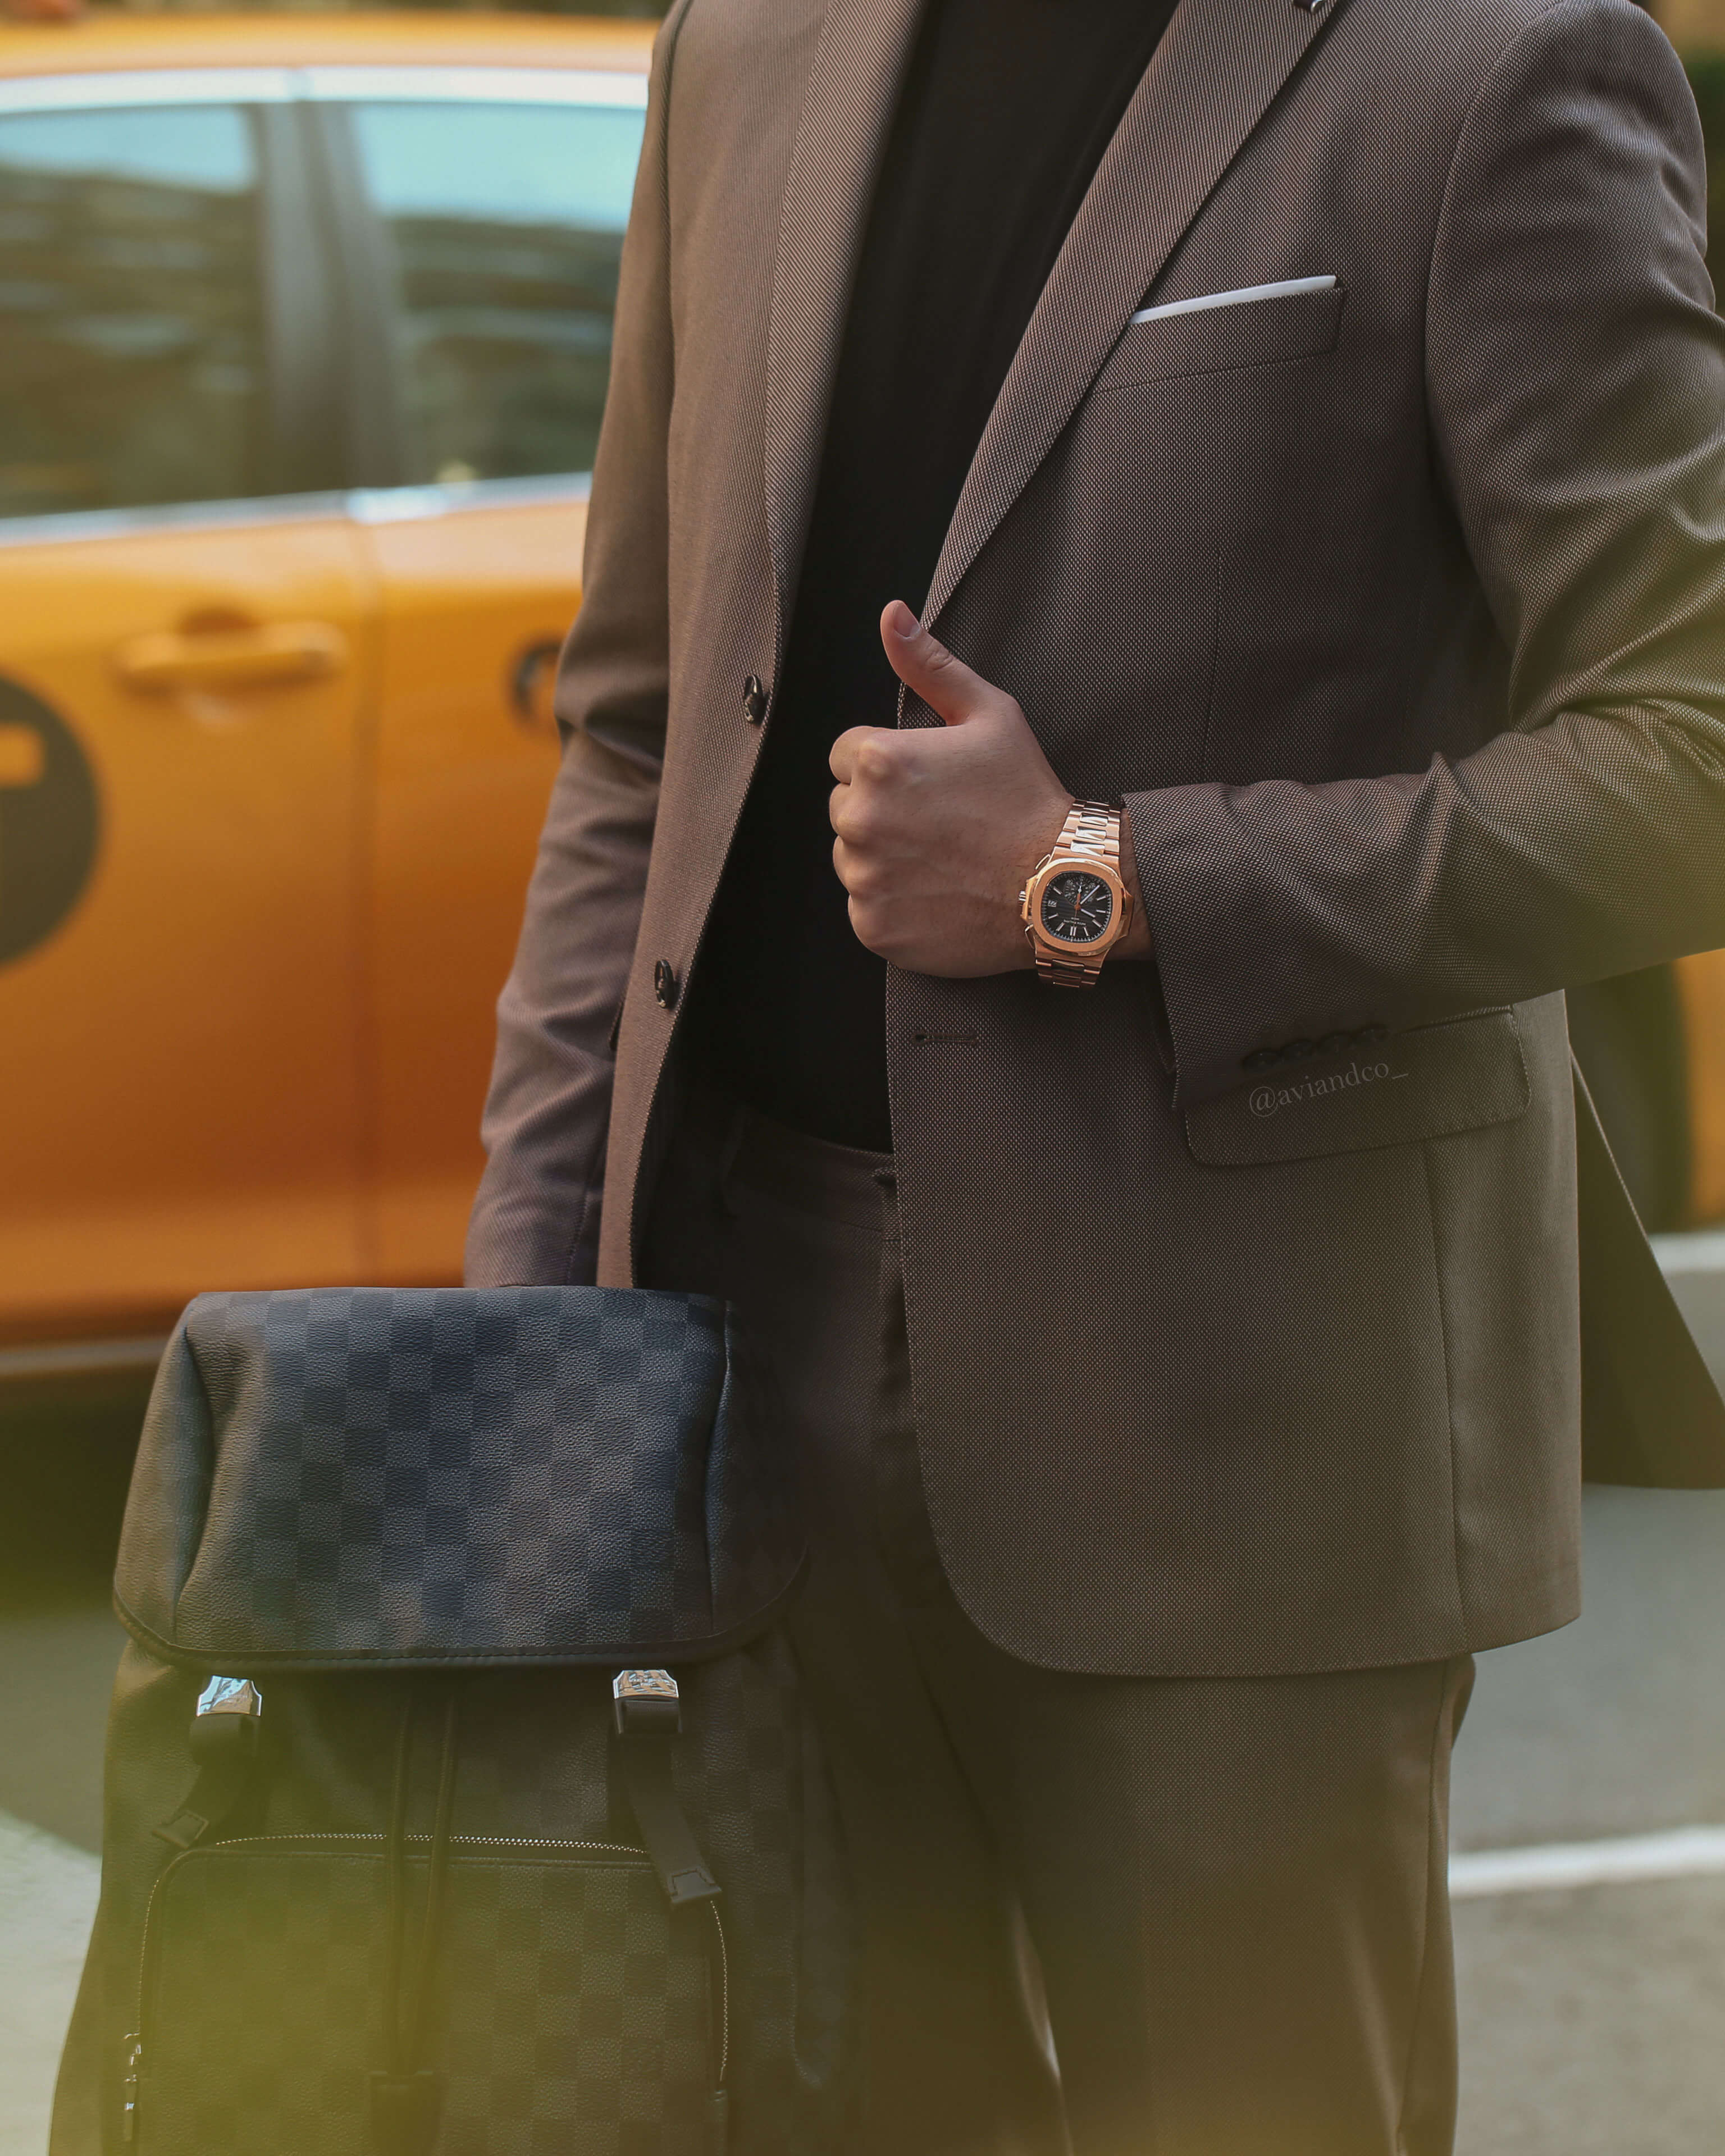 18K Yellow Gold Bezel and Bracelet, Black Dial Timepiece on Man’s Wrist, Wearing a Brown Suit Holding a Checkerboard Backpack in Front of NYC Yellow Taxi